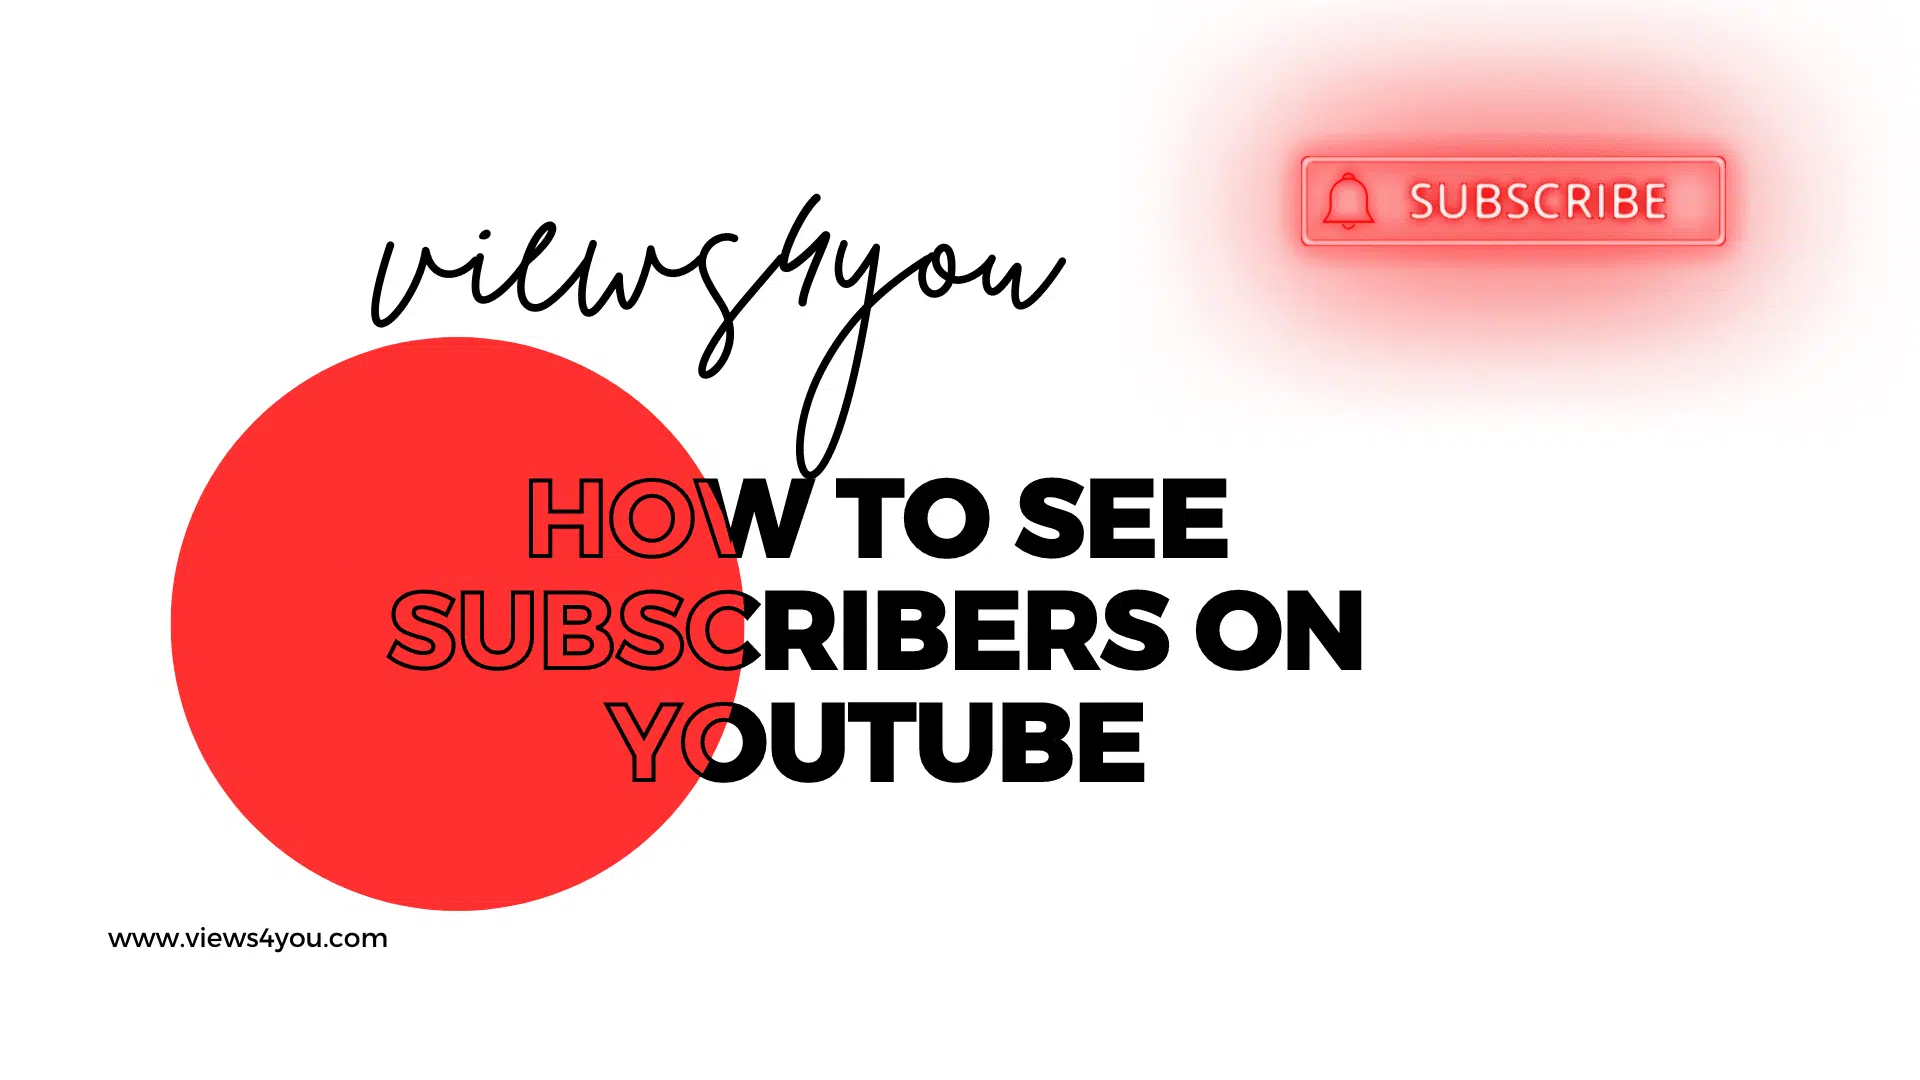 Learn how to se subscribers on YouTube.